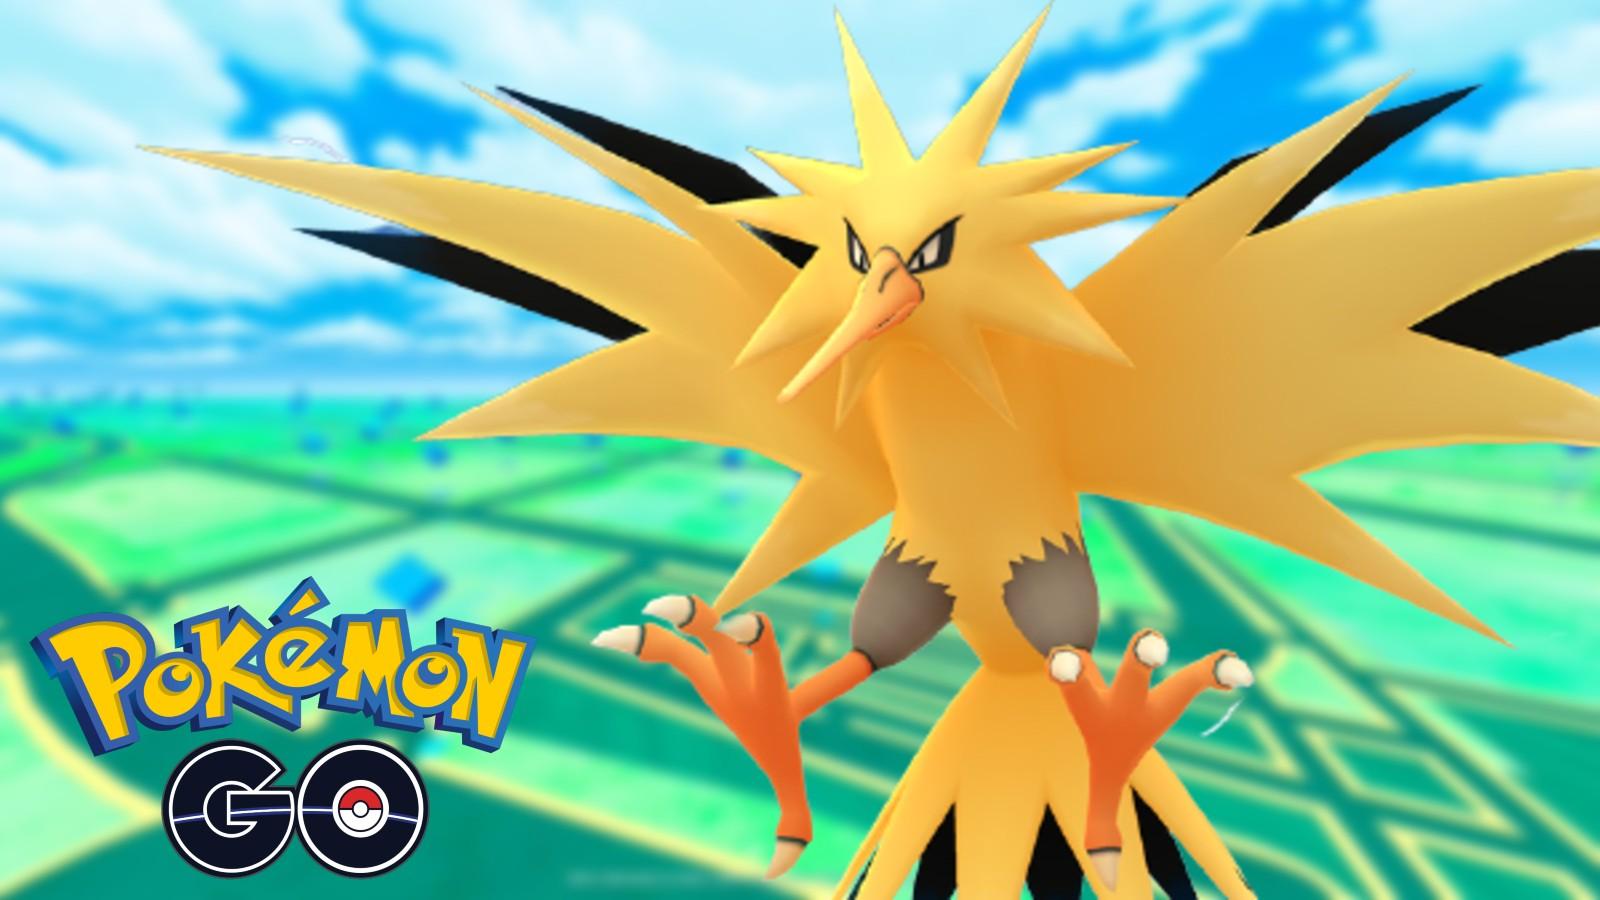 Pokemon GO Shadow Zapdos raid guide: Weaknesses, best counters, and more